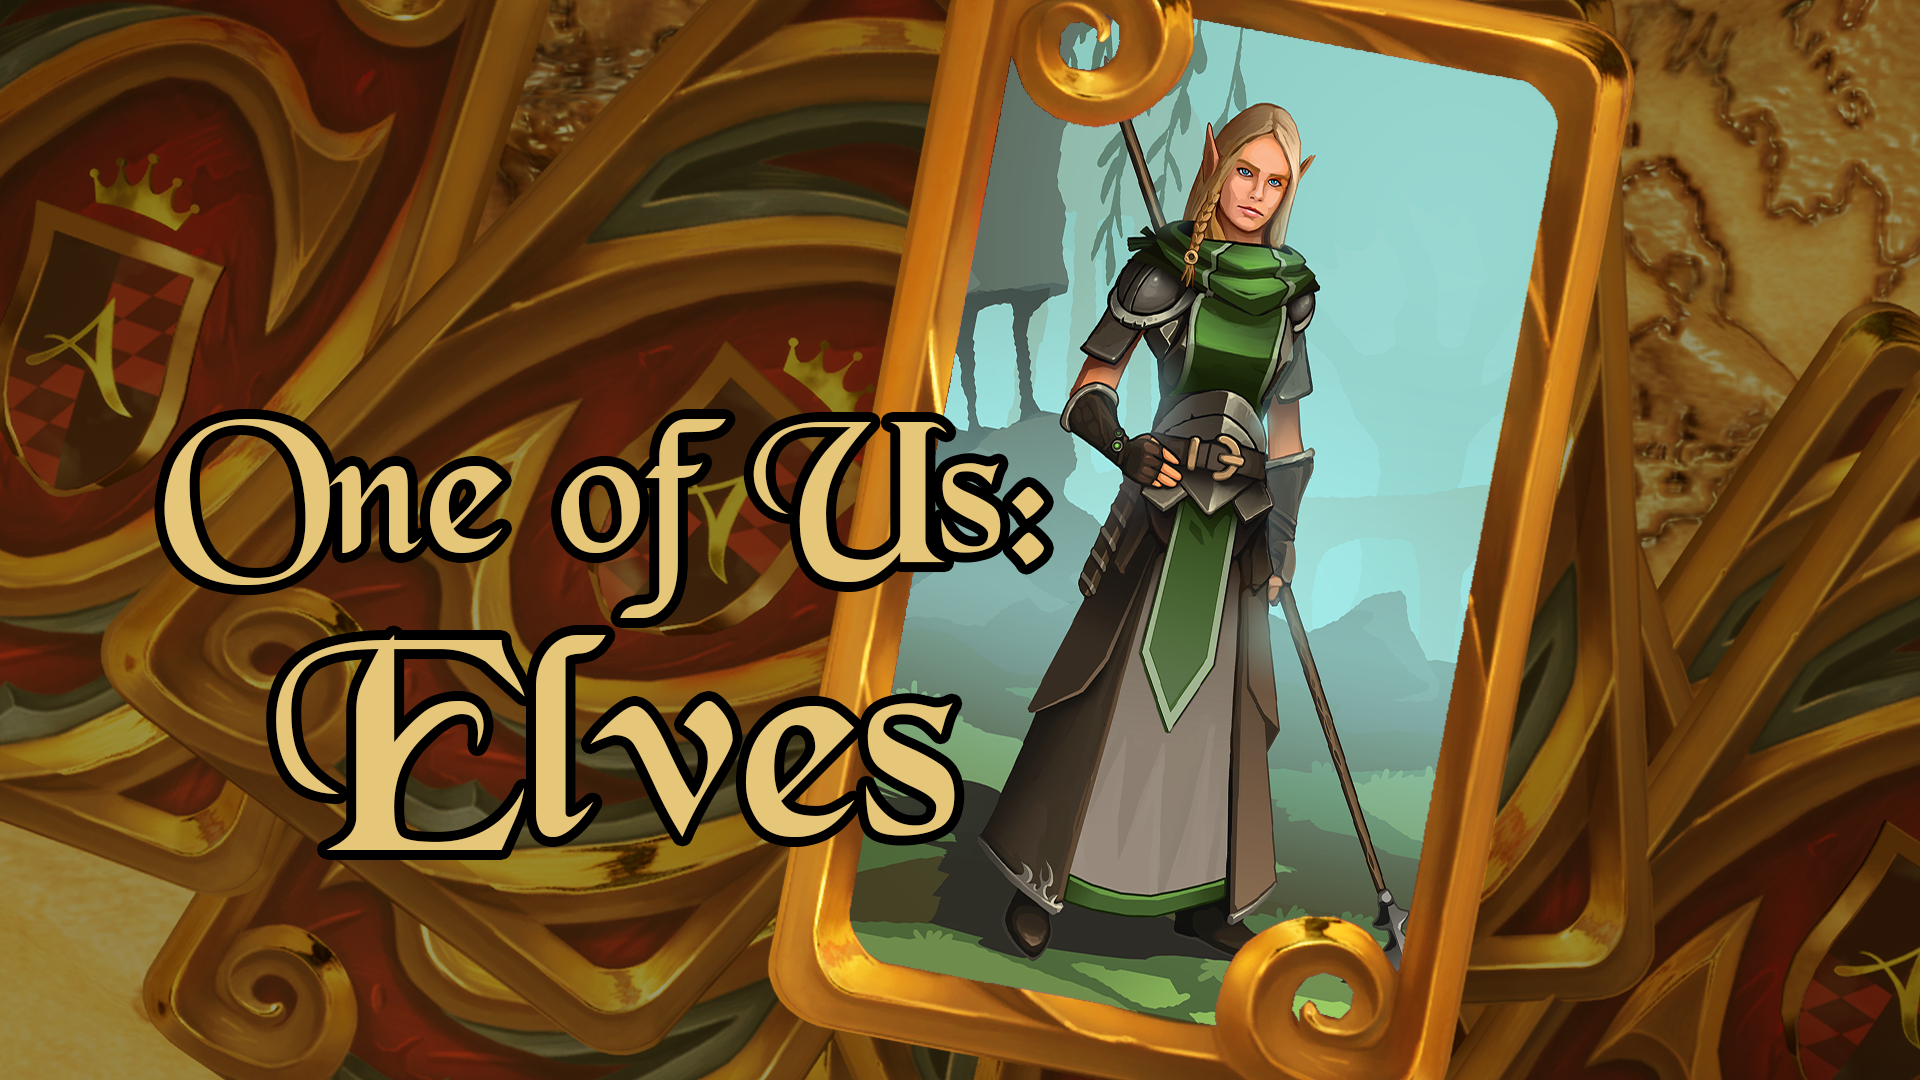 Icon for One of us: Elves